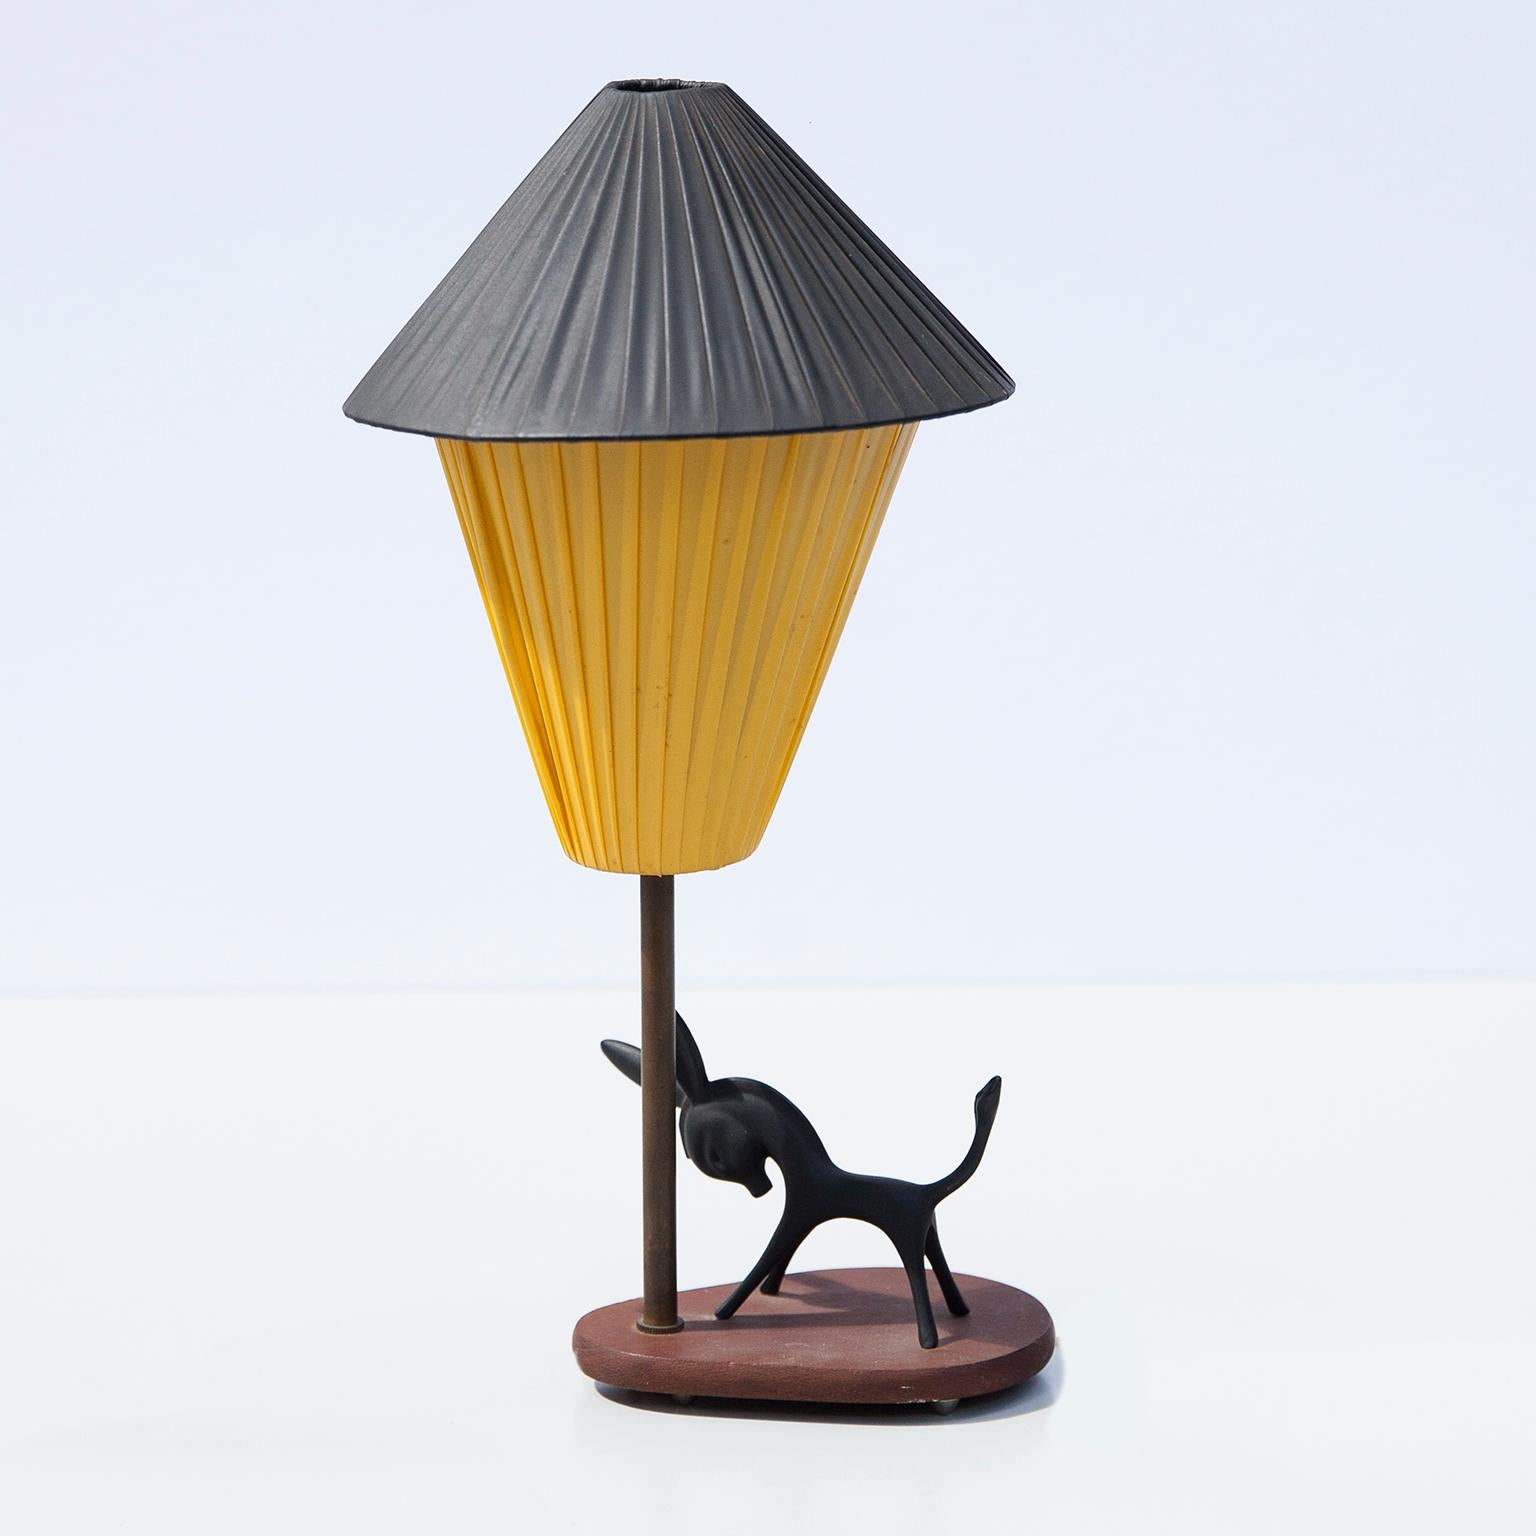 Table lamp form of a donkey designed by Walter Bosse and manufactured by Hertha Baller, Austria, Vienna, in 1950s. The donkey is made of patinated and aged blackened brass placed on a teak base with two original shades.

This charming piece is an